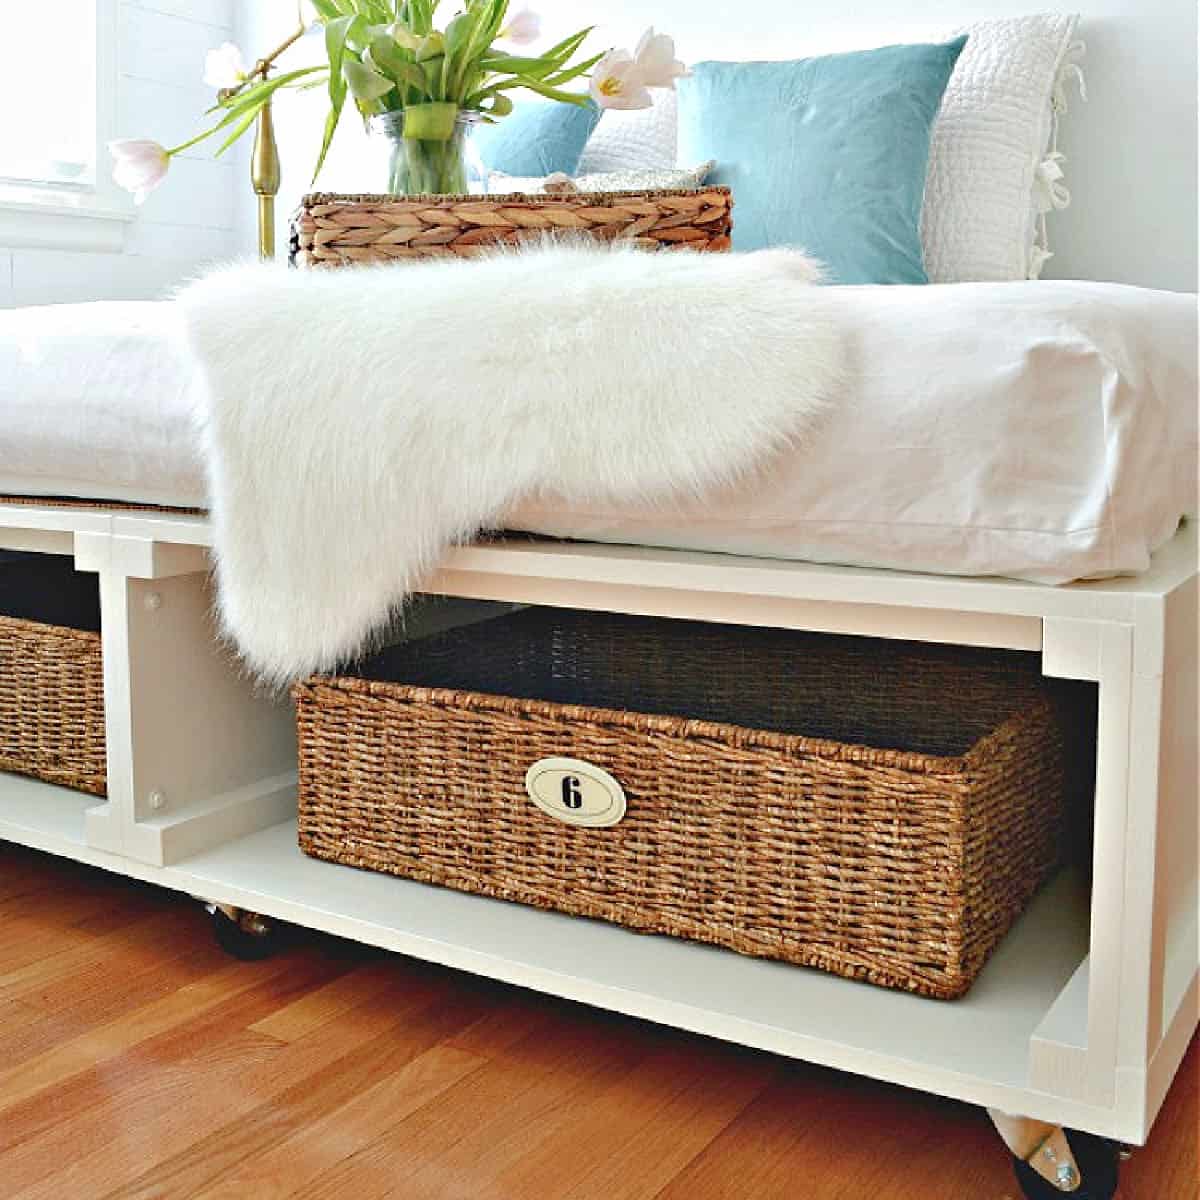 diy white painted platform bed with numbered baskets for storage